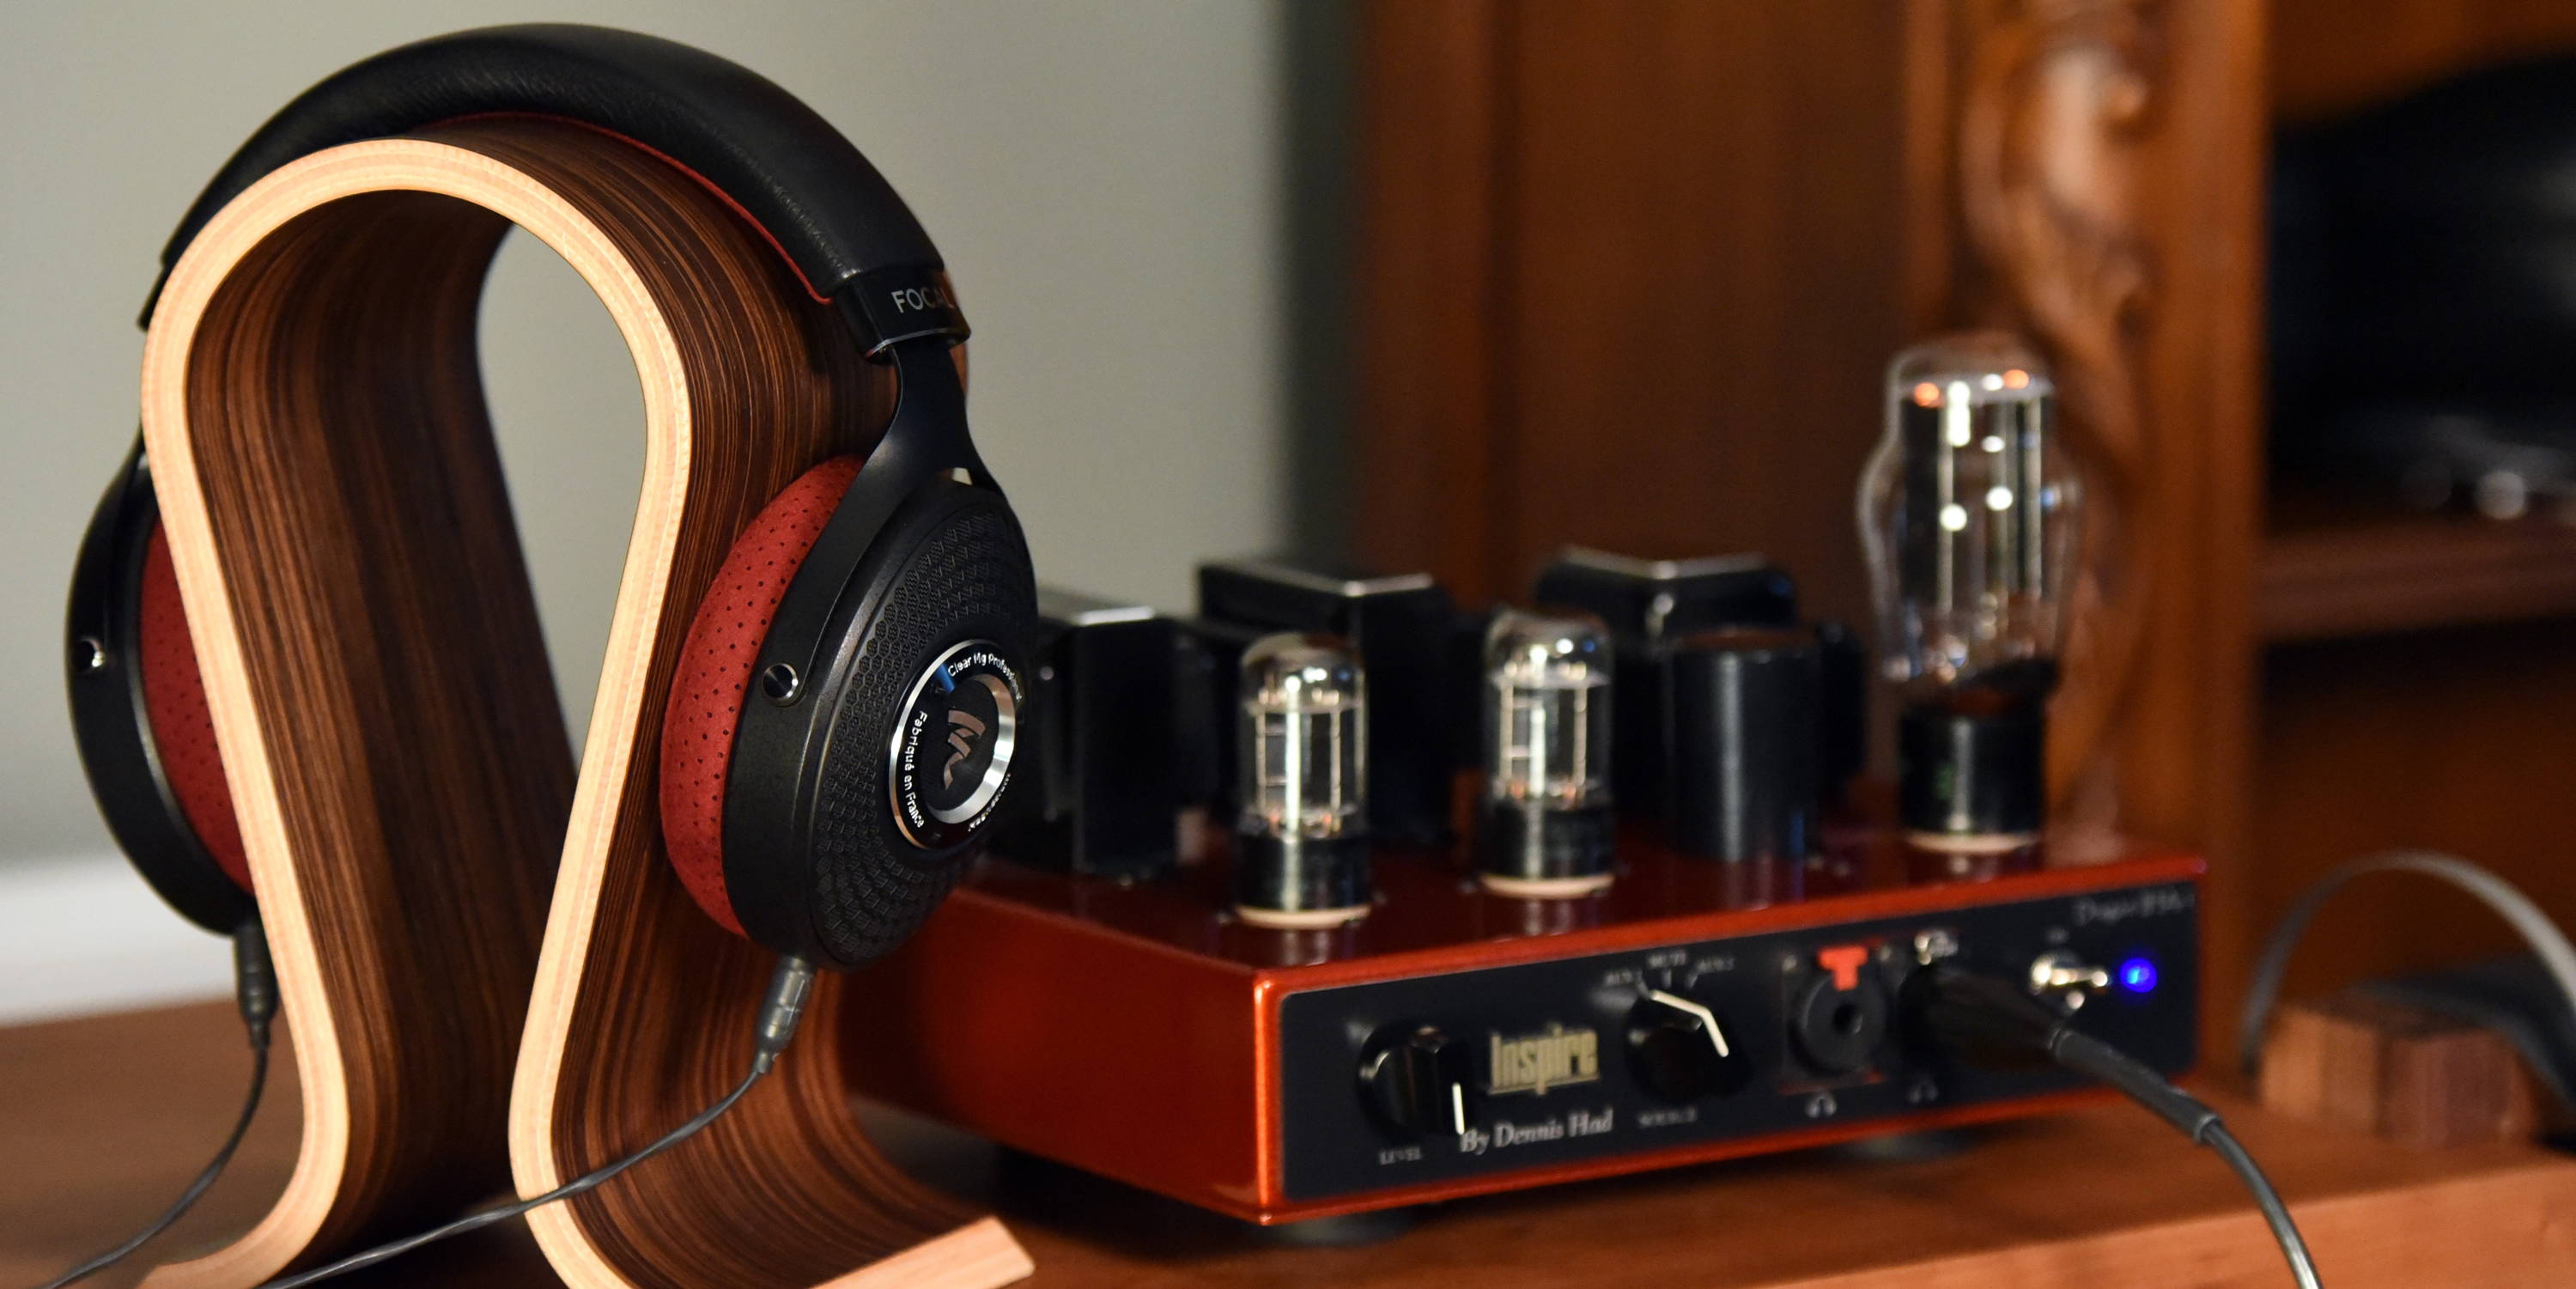 Focal Clear Mg Professional Headphone Review - Moon Audio